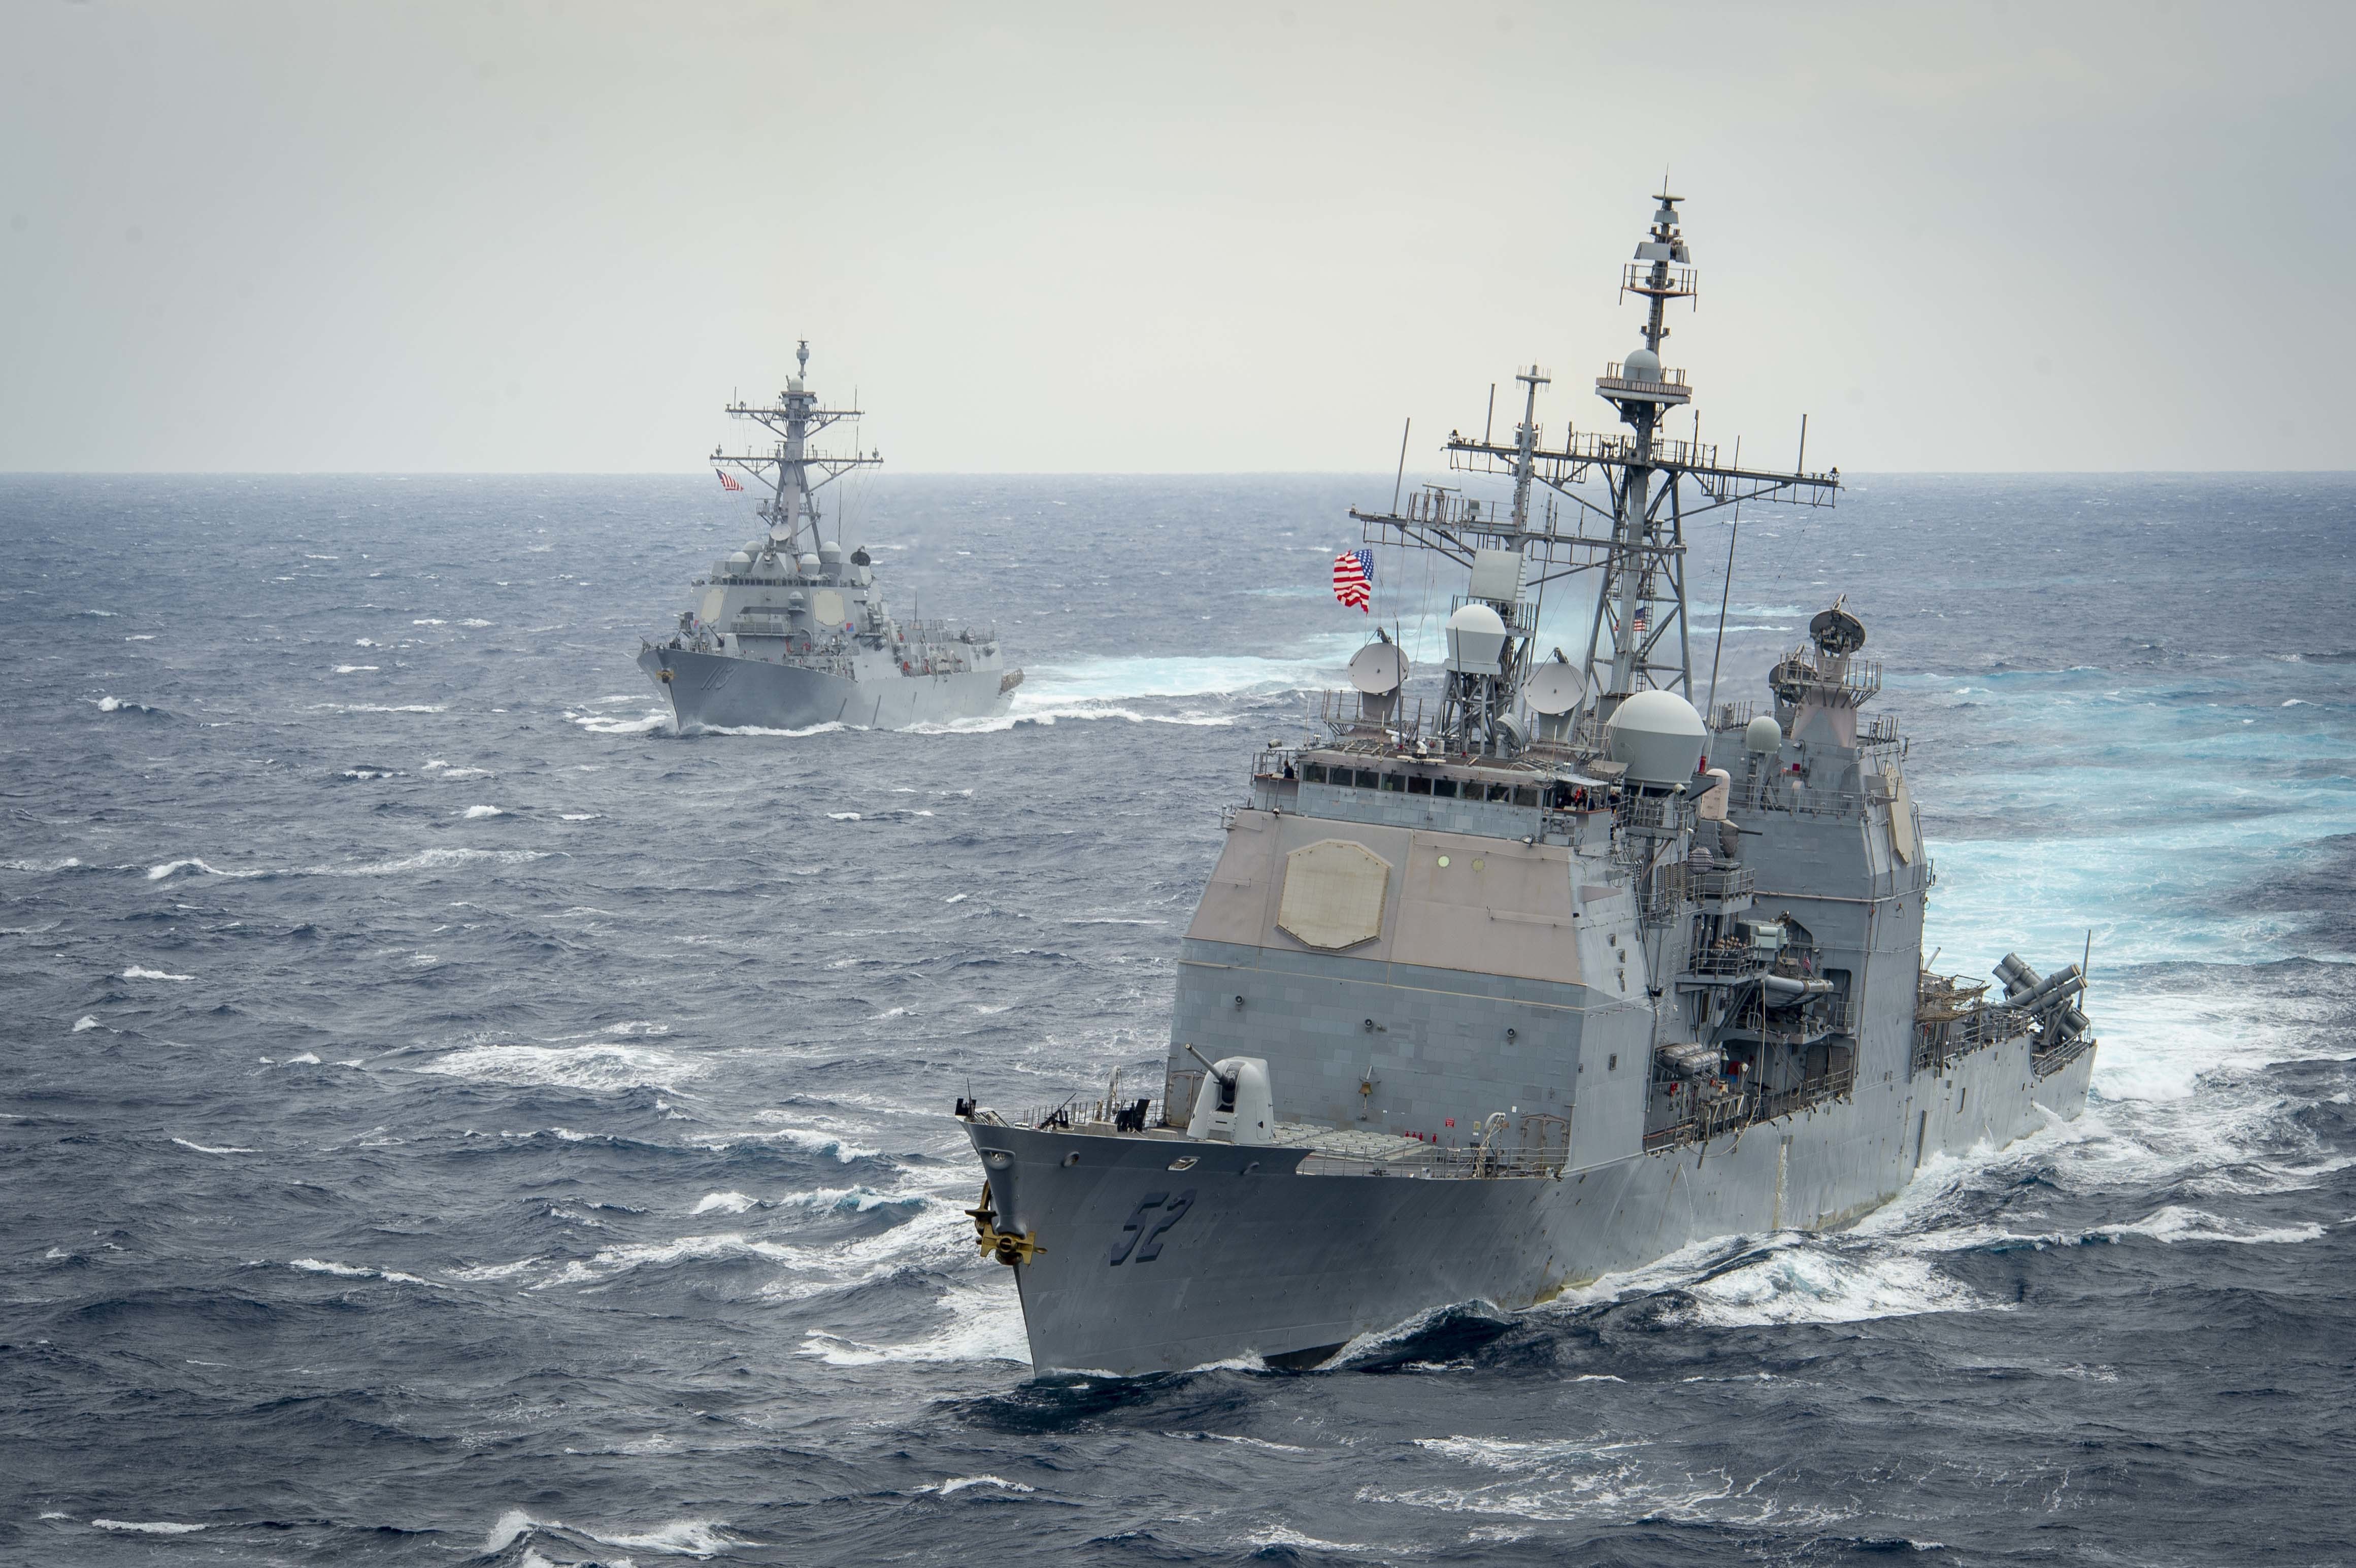 The Ticonderoga-class guided-missile cruiser USS Bunker Hill (CG 52), front, and the Arleigh Burke-class guided-missile destroyer USS John Finn (DDG 113) transit the Pacific Ocean.